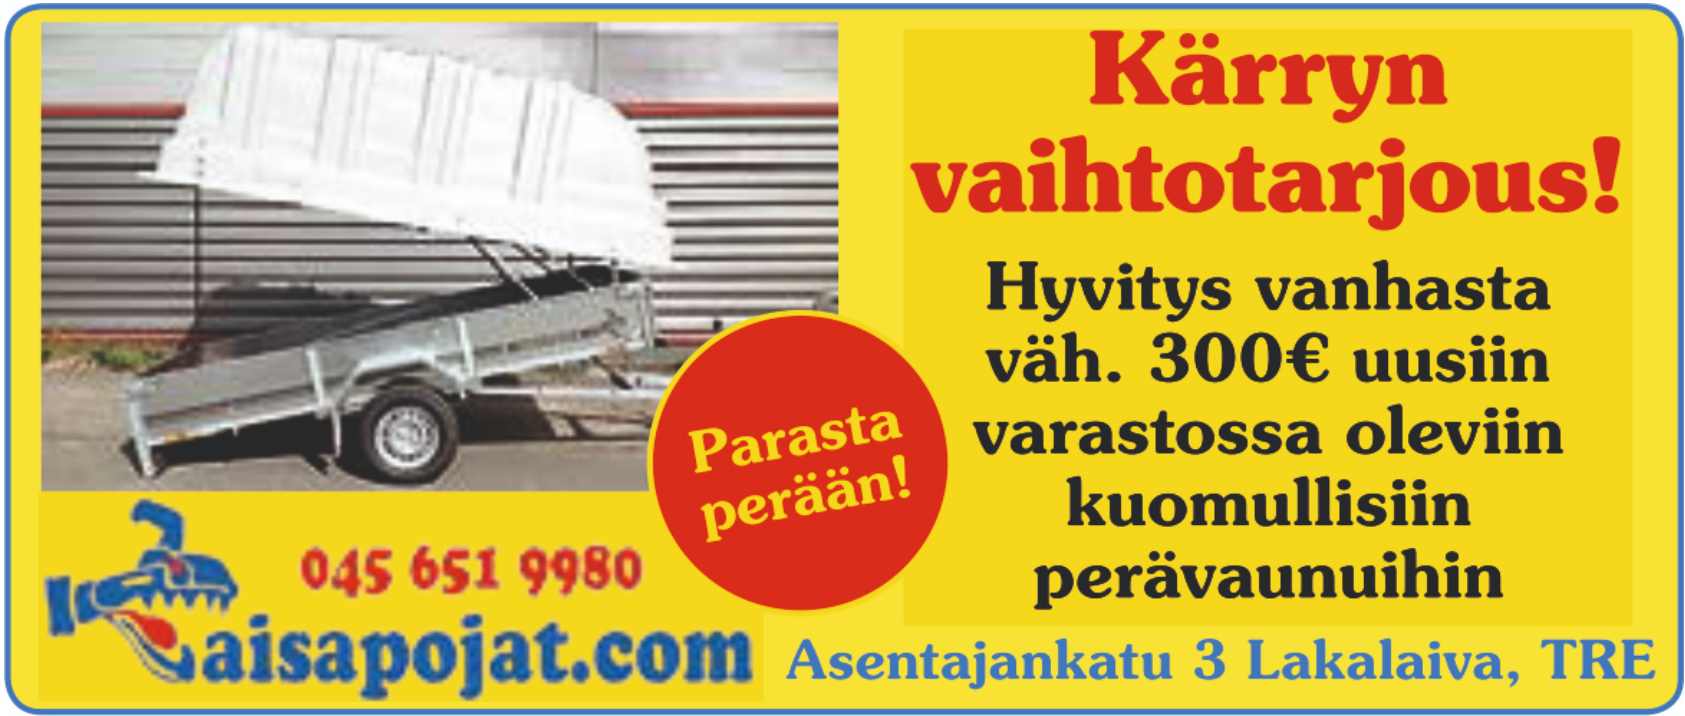 Images Aisapojat Oy